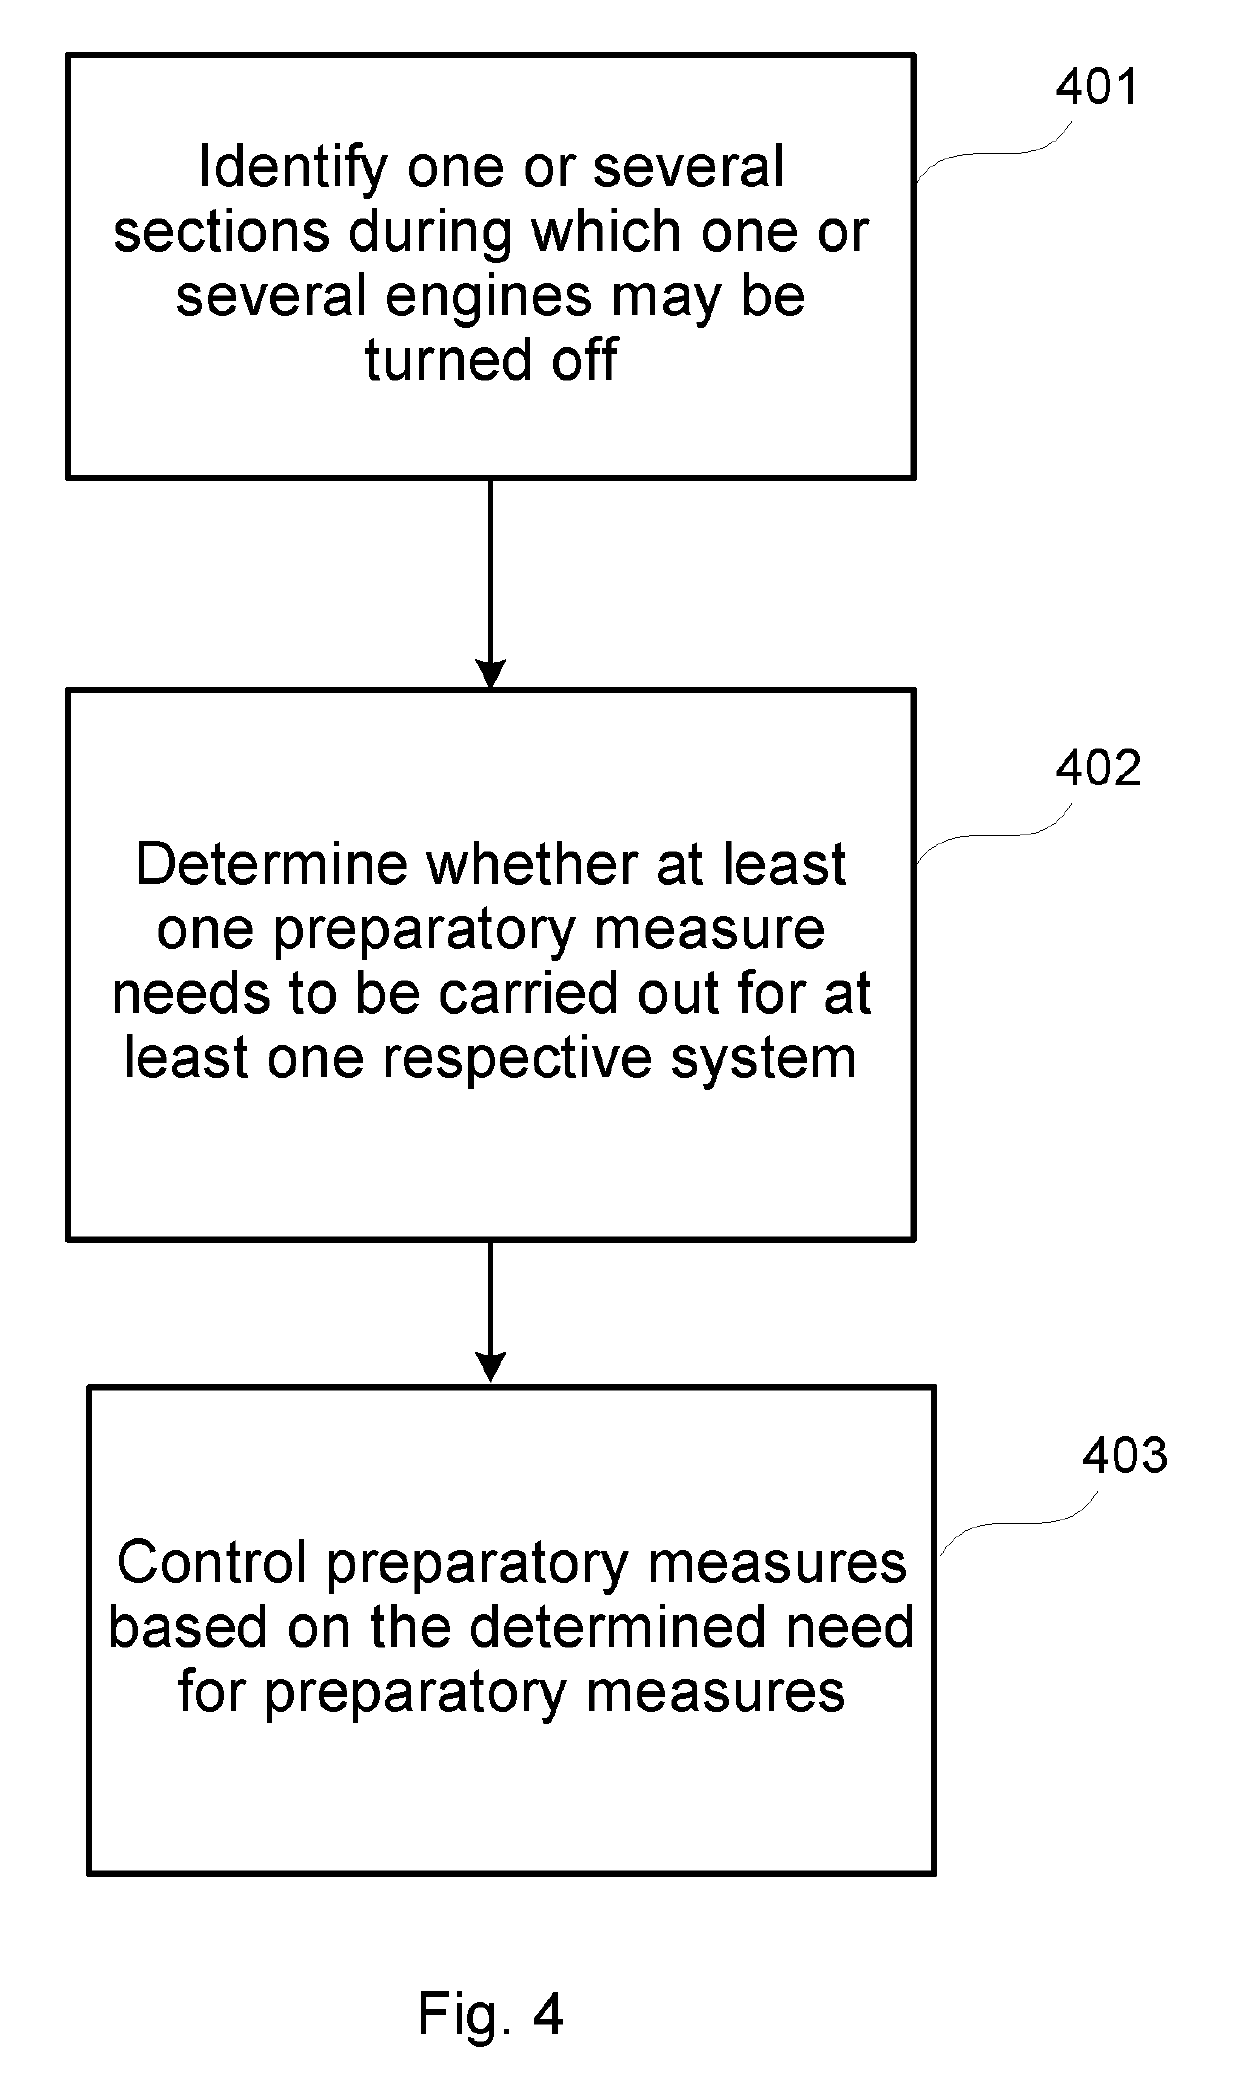 Control of preparatory measures in a vehicle